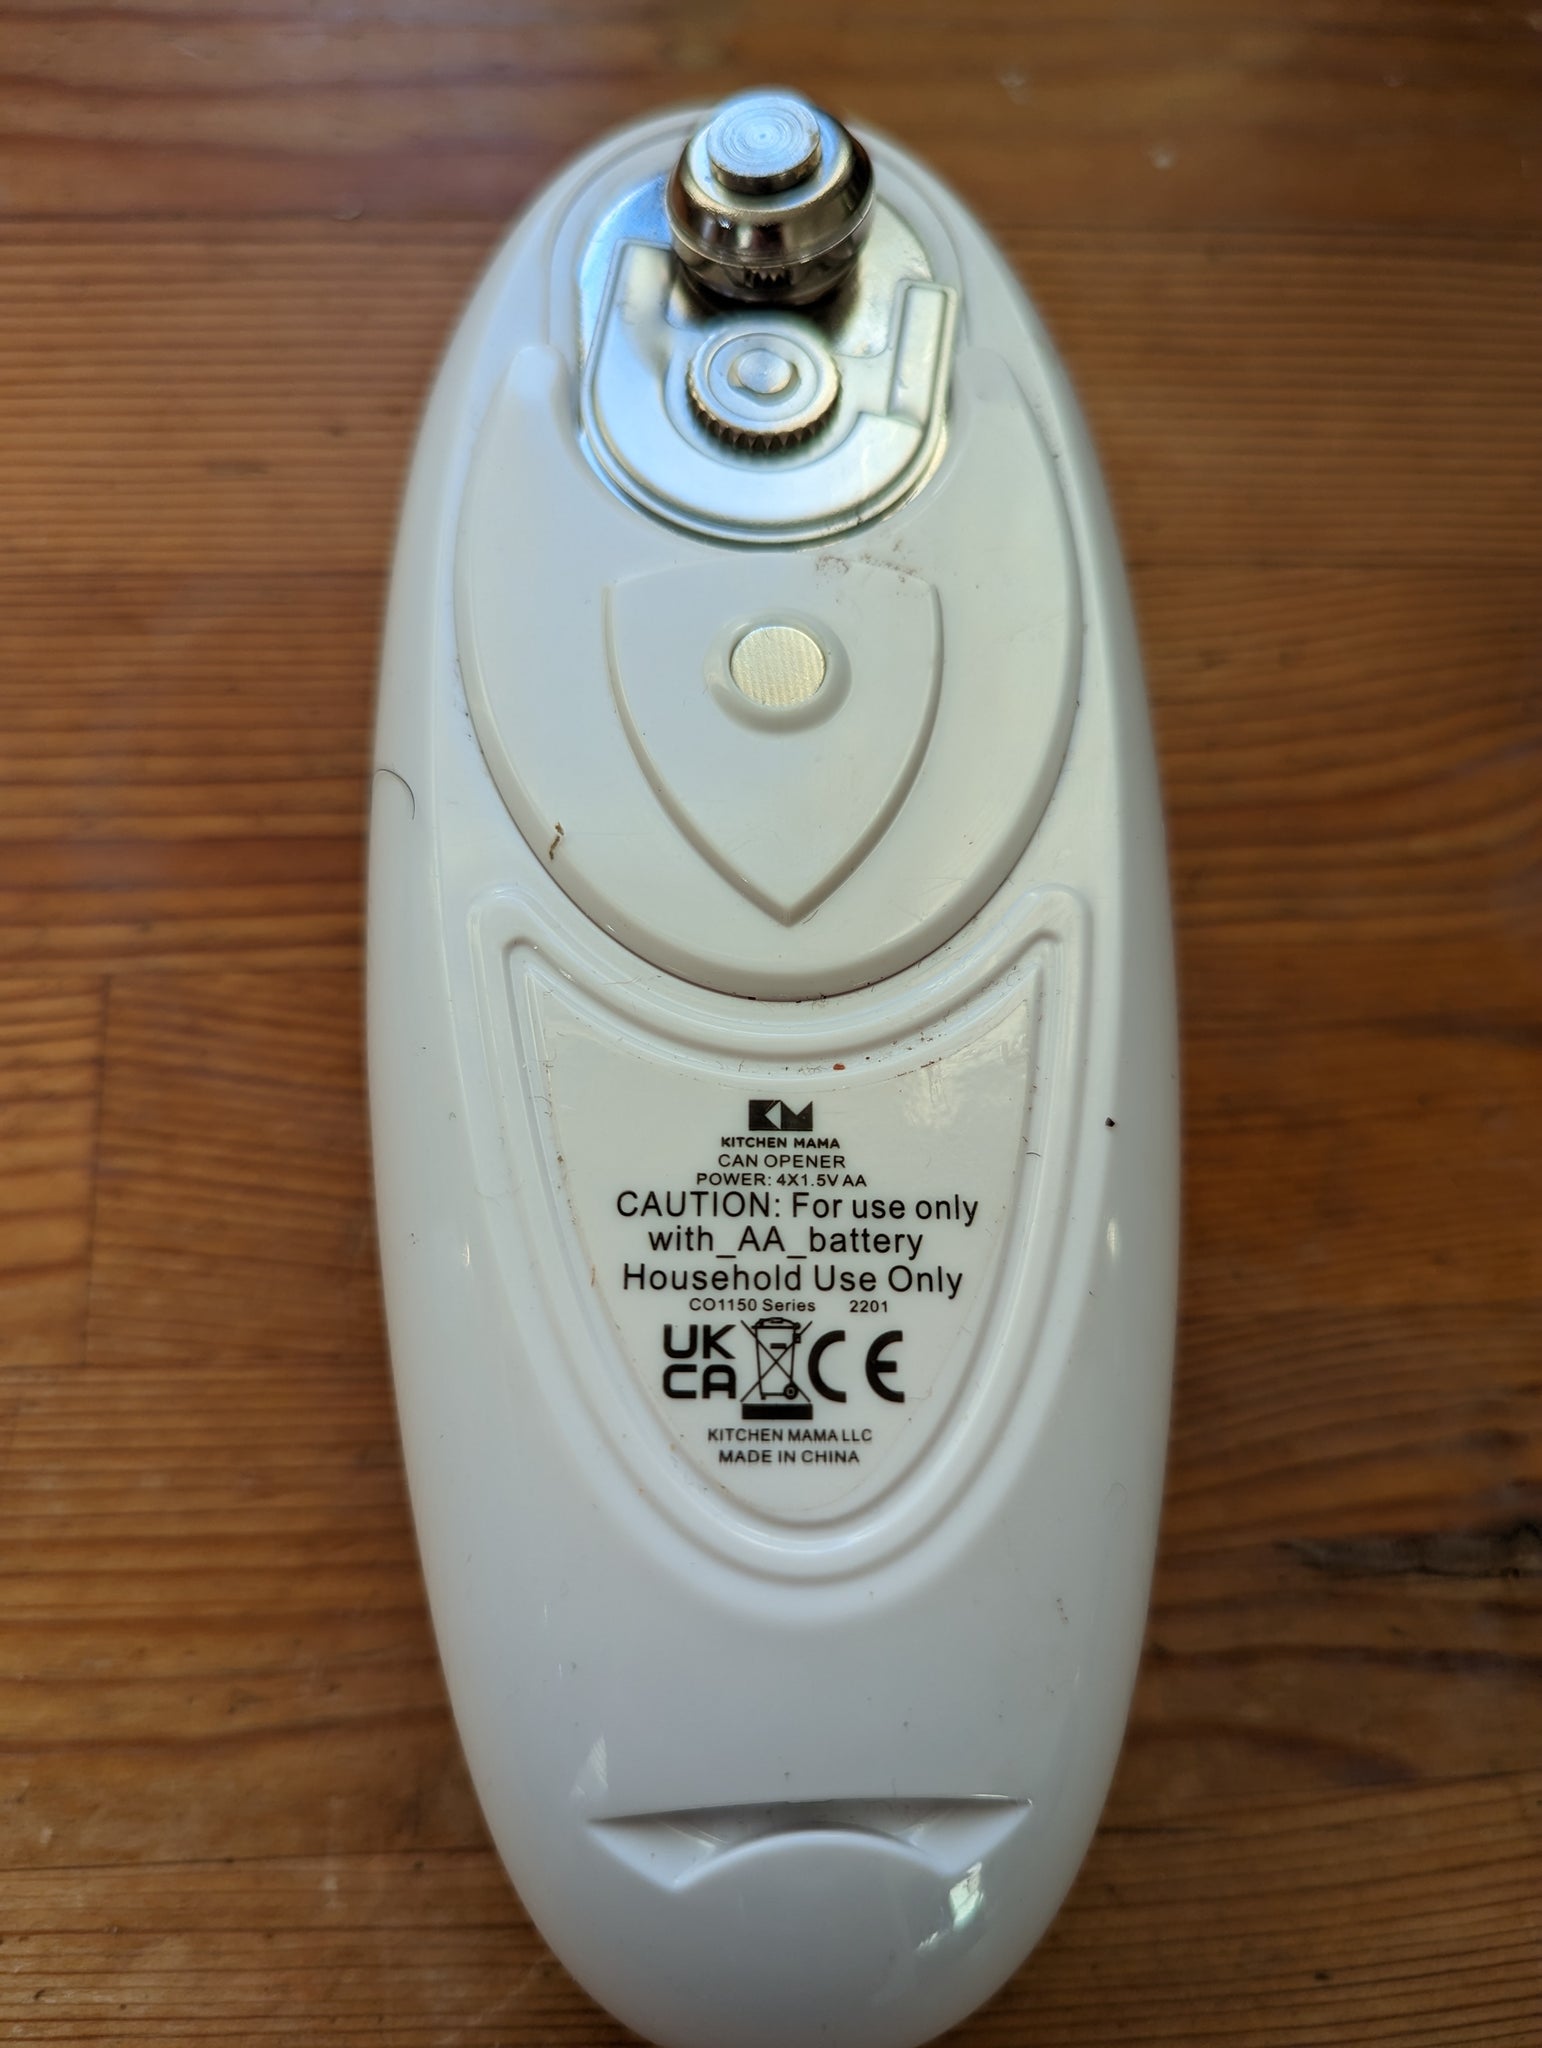 Kitchen Mama Electric Can Opener 2.0: Upgraded Blade Opens Any Can